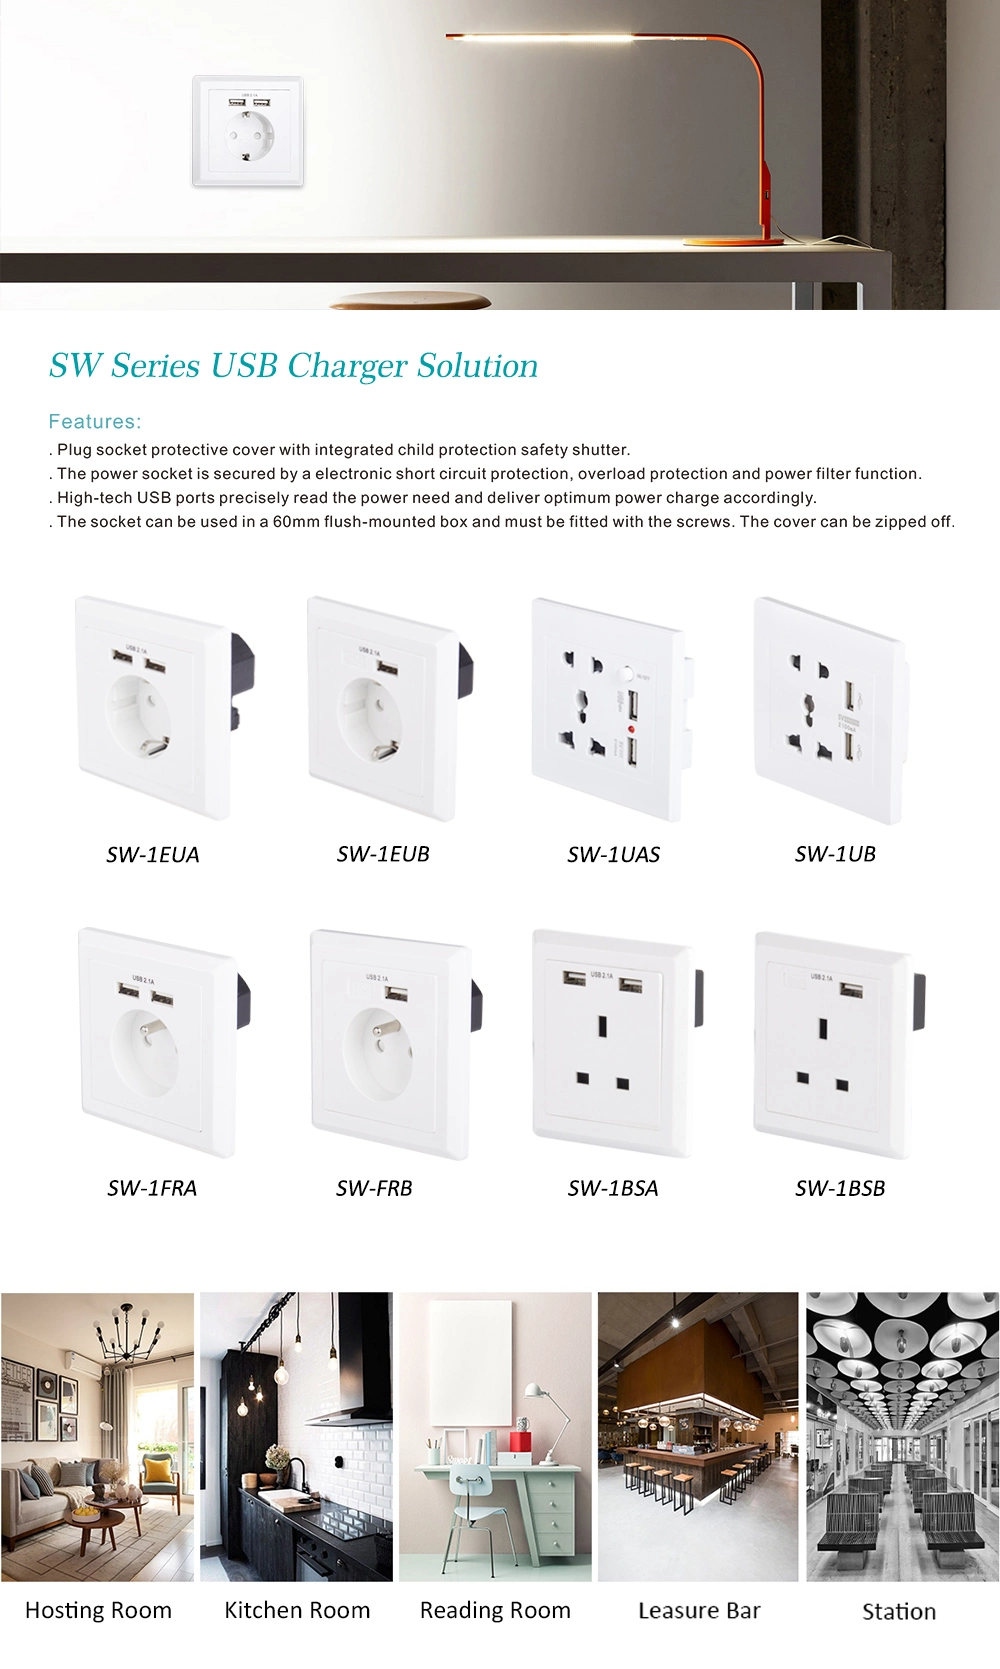 6-Port USB Charger for iPhone 7 / 6s, iPad, Galaxy S7 / S6 / Edge / Plus, Note 5 / 4, LG, Nexus, HTC